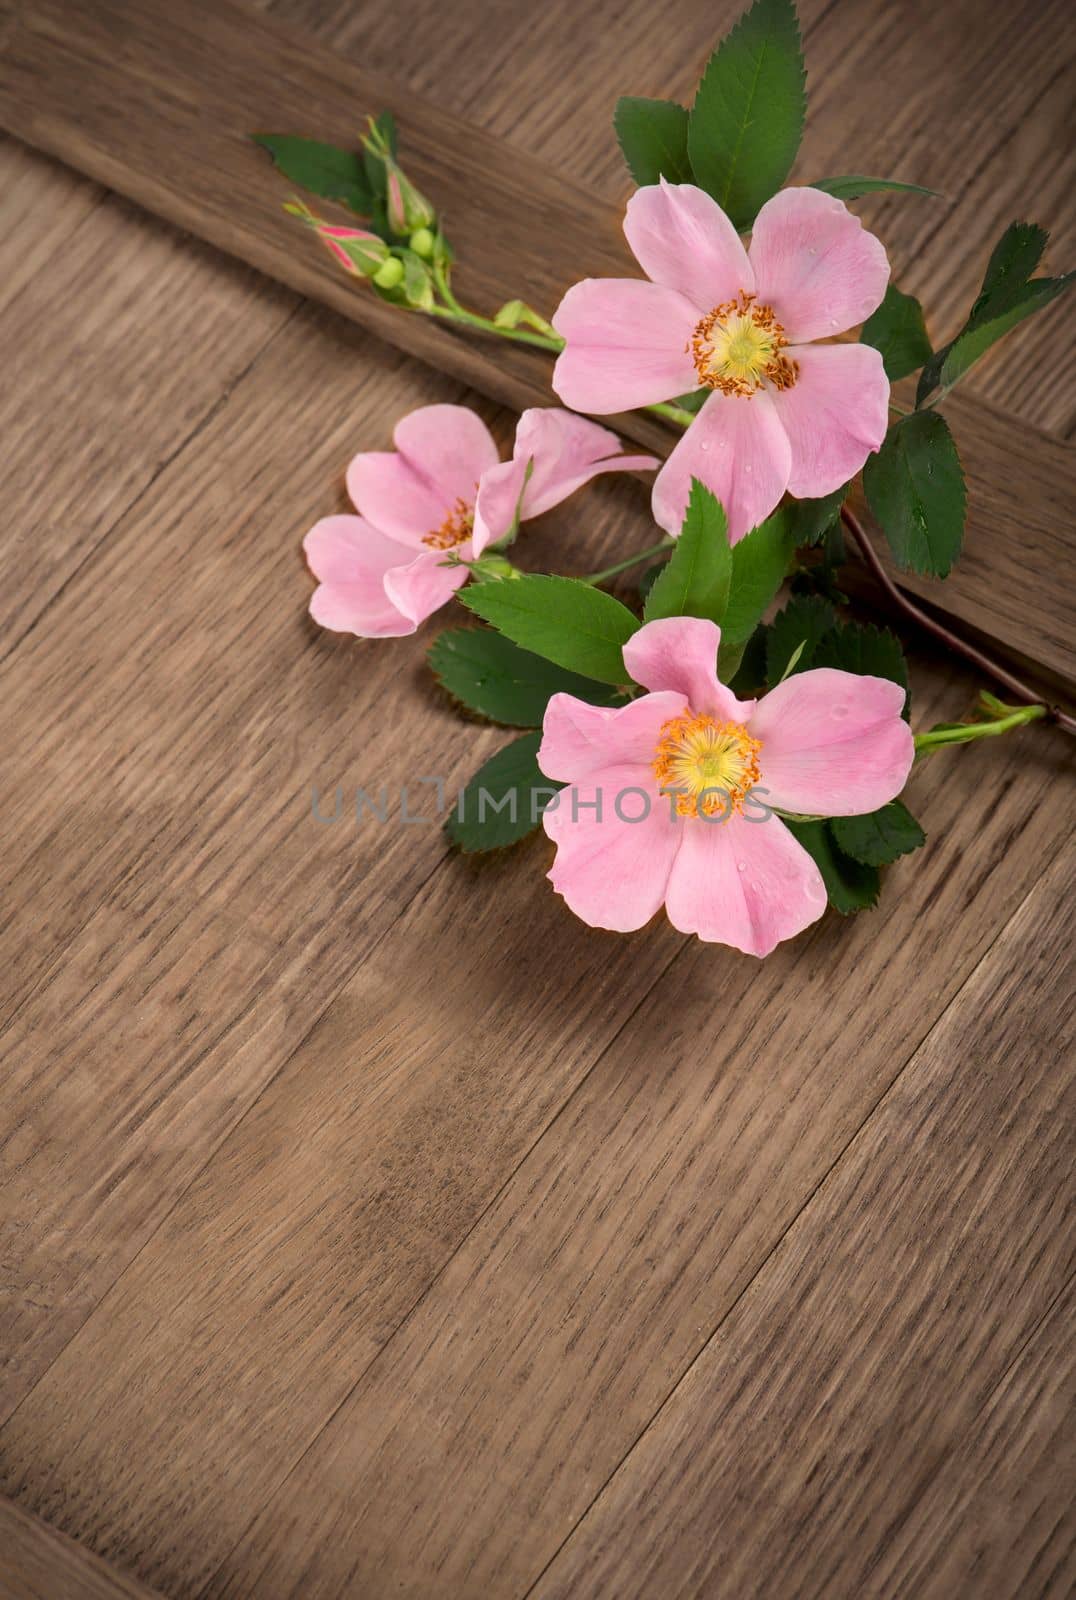 dogrose flowers on a wooden board